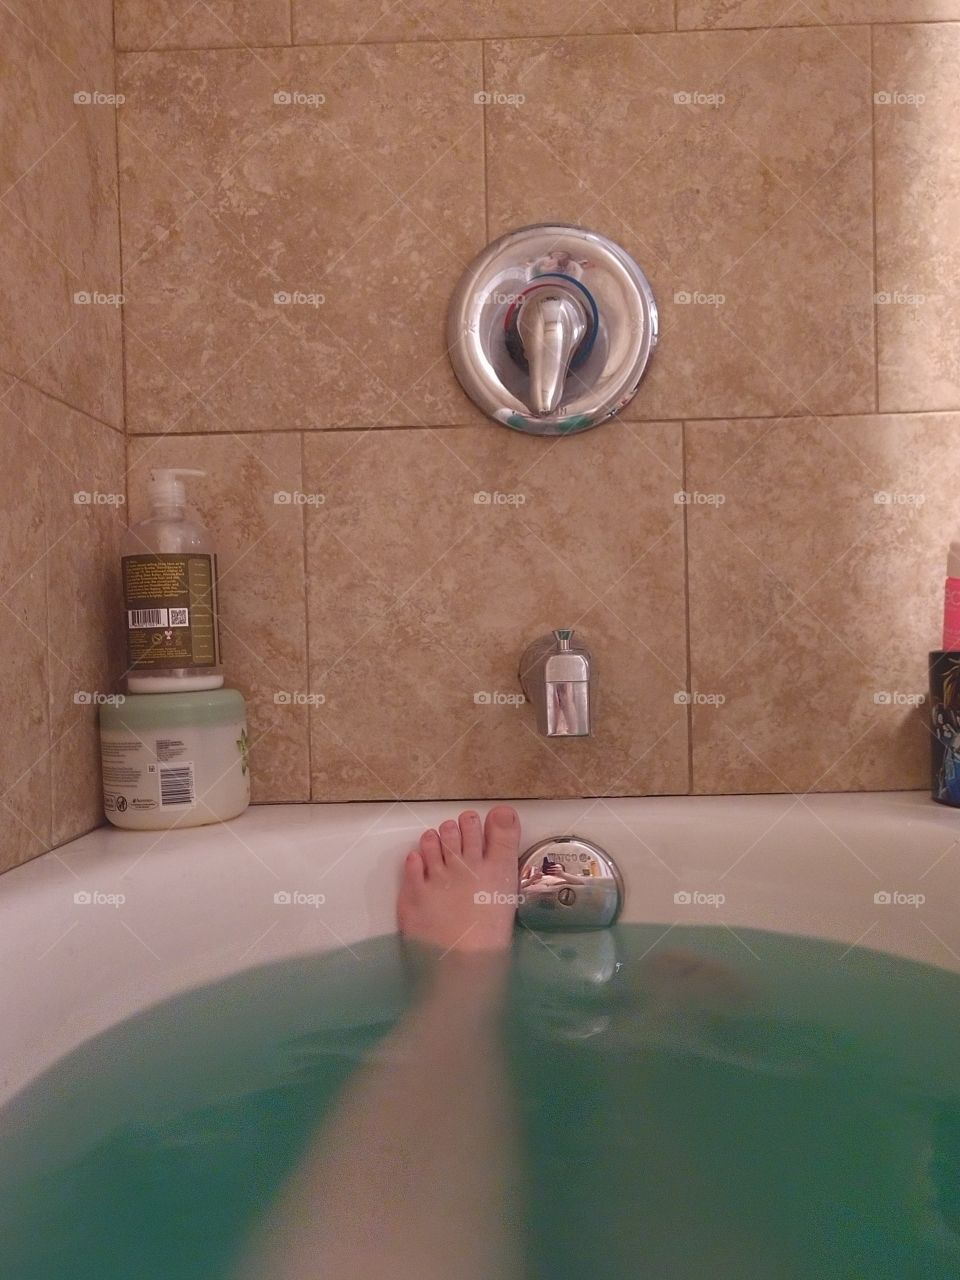 Green Bath bombs can make ANY one feel like the wicked witch of the west.